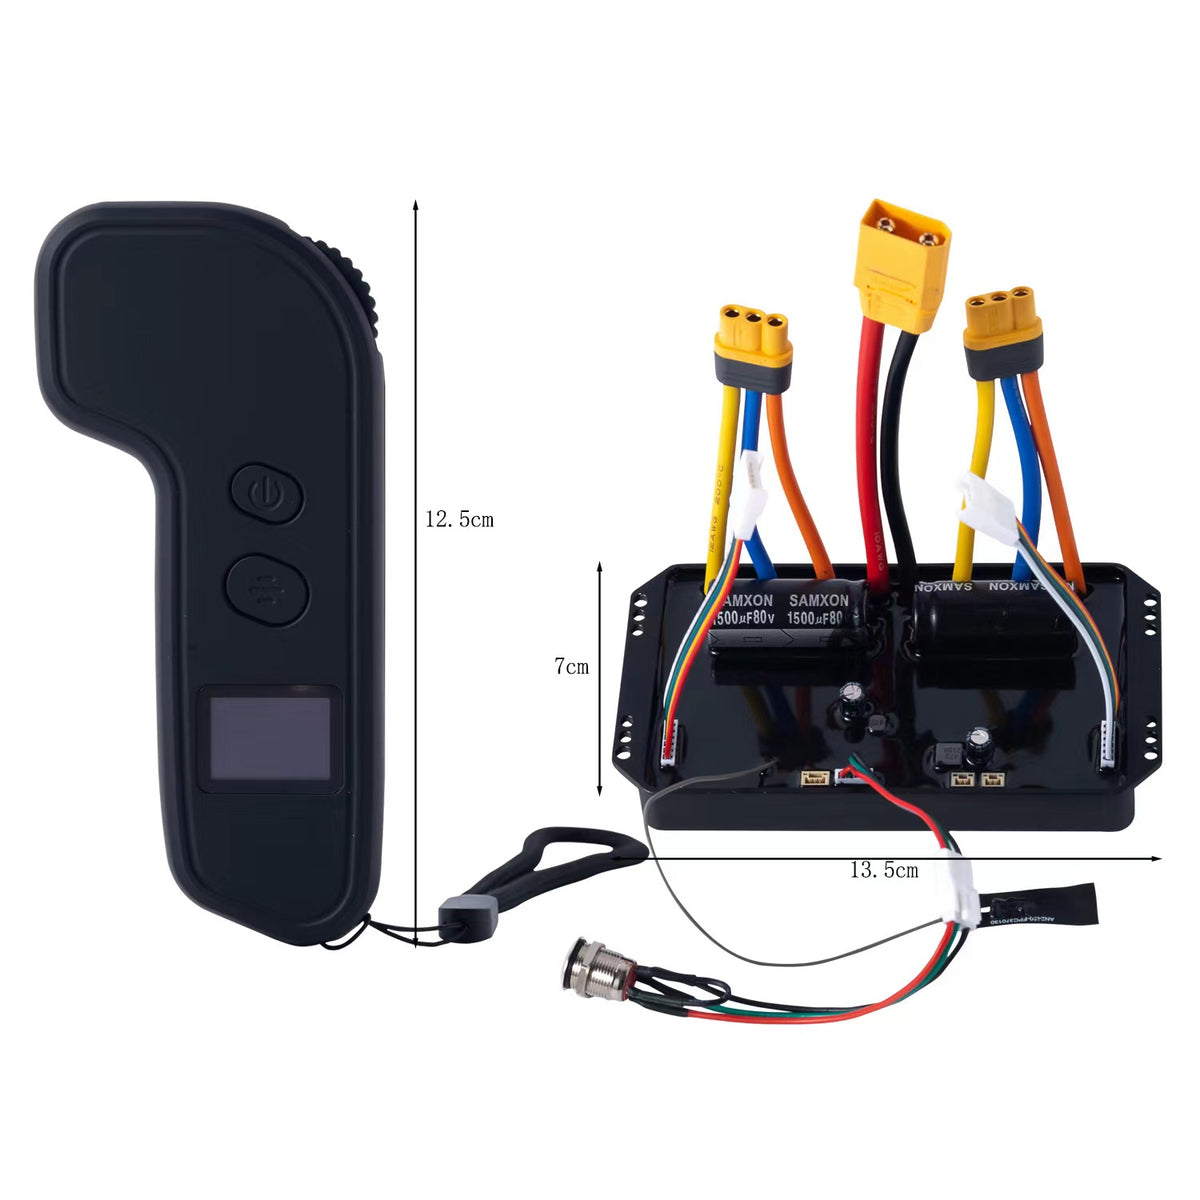 Verreal 100A FOC ESC(Electronics Speed Controller) & Remote Controller Combo for DIY Electric Skateboards w/ Self Learning Motor Specs